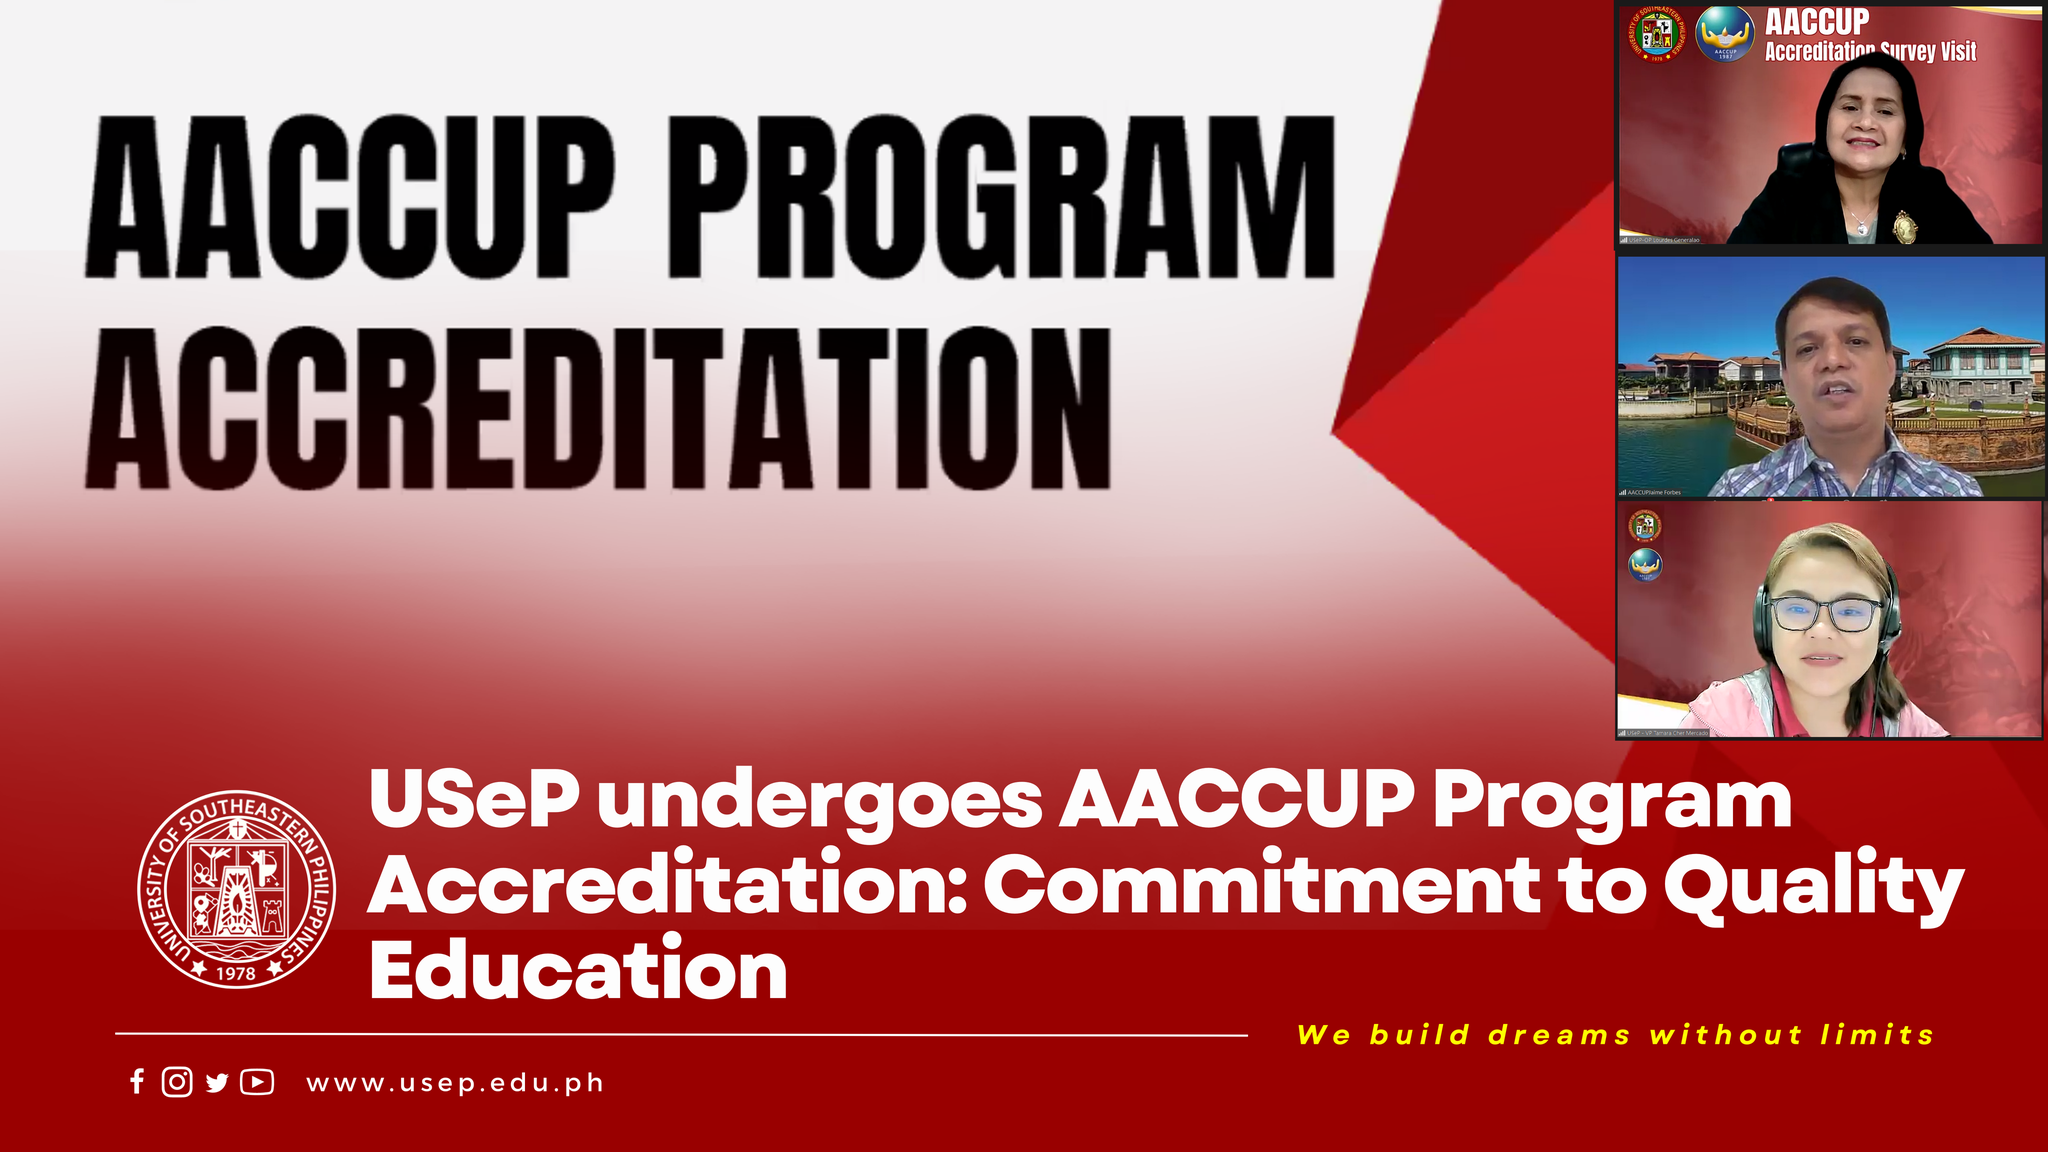 USeP undergoes AACCUP Program Accreditation: Commitment to Quality Education